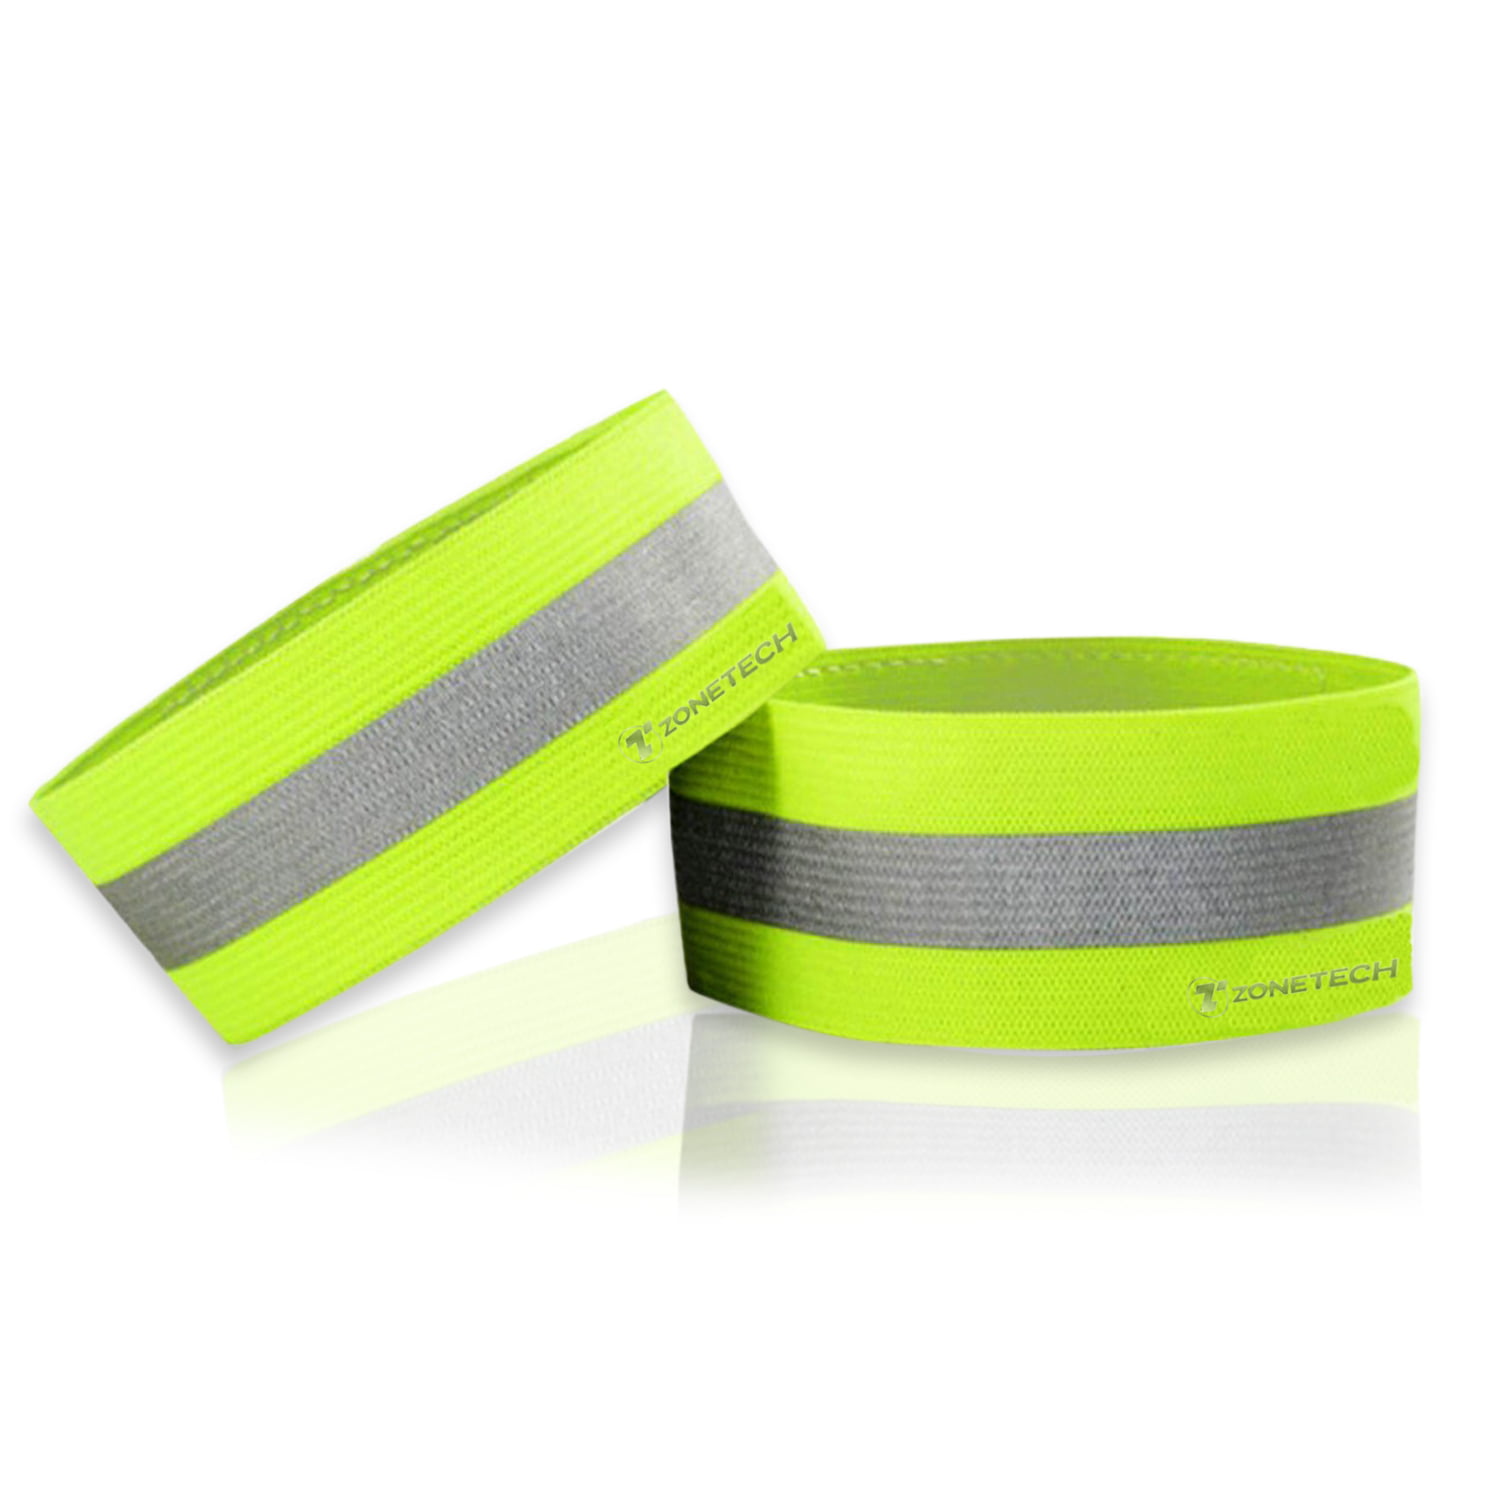 Set of 10 High Visibility Reflective Slap On Wrist & Ankle Bands Fluorescent Y 